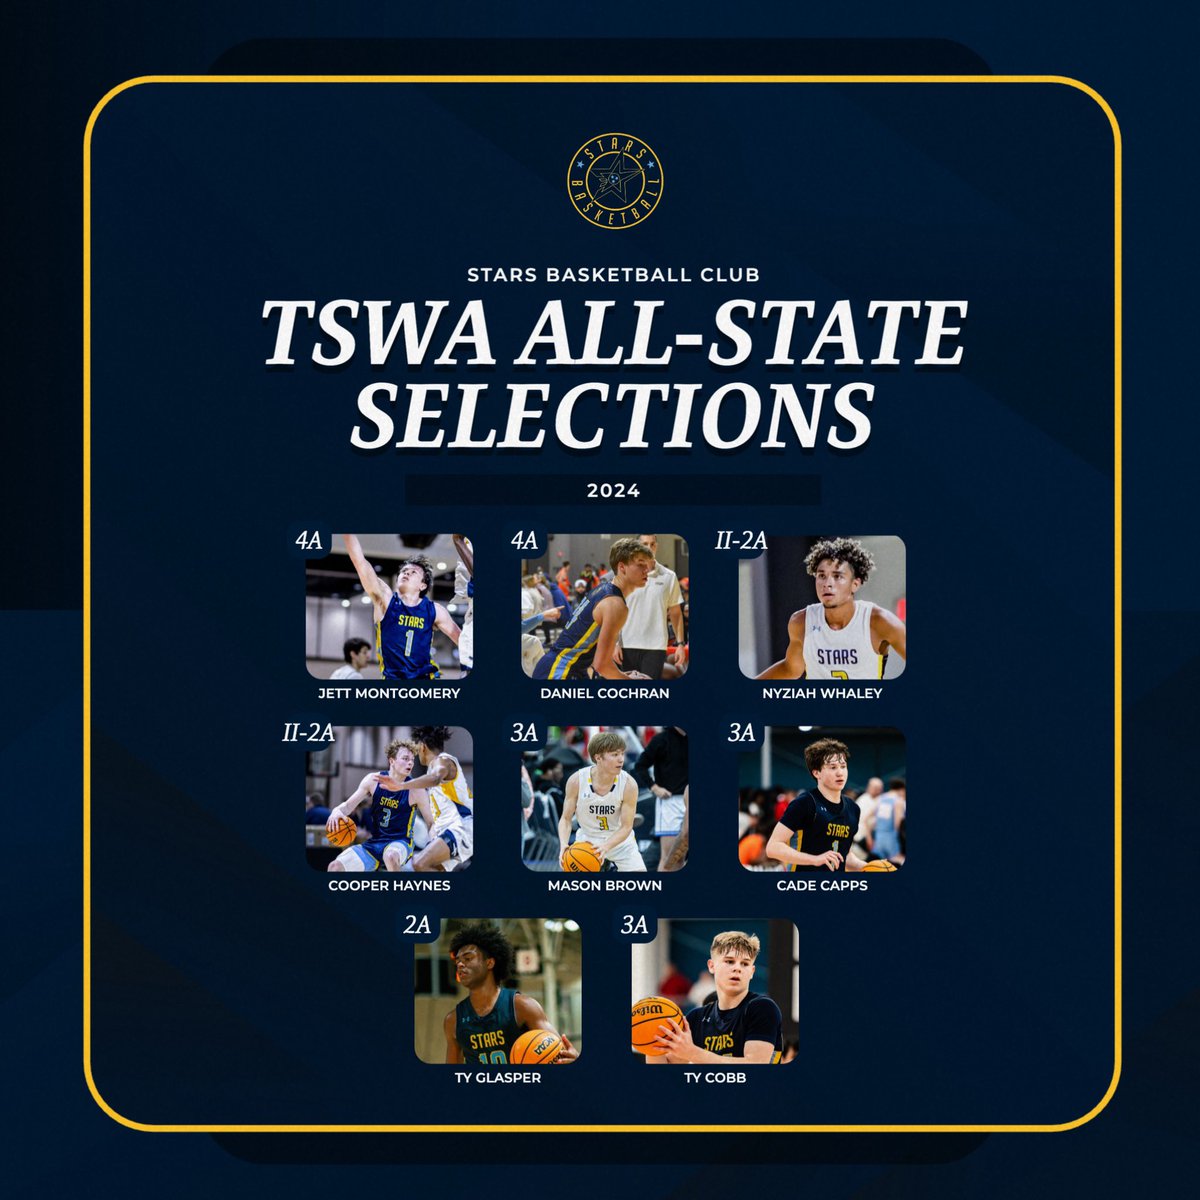 STARS had 8 players named to the TSWA All-State teams! Congrats to these guys on great seasons!🌟#morethan @risecircuit @UANextBHoops